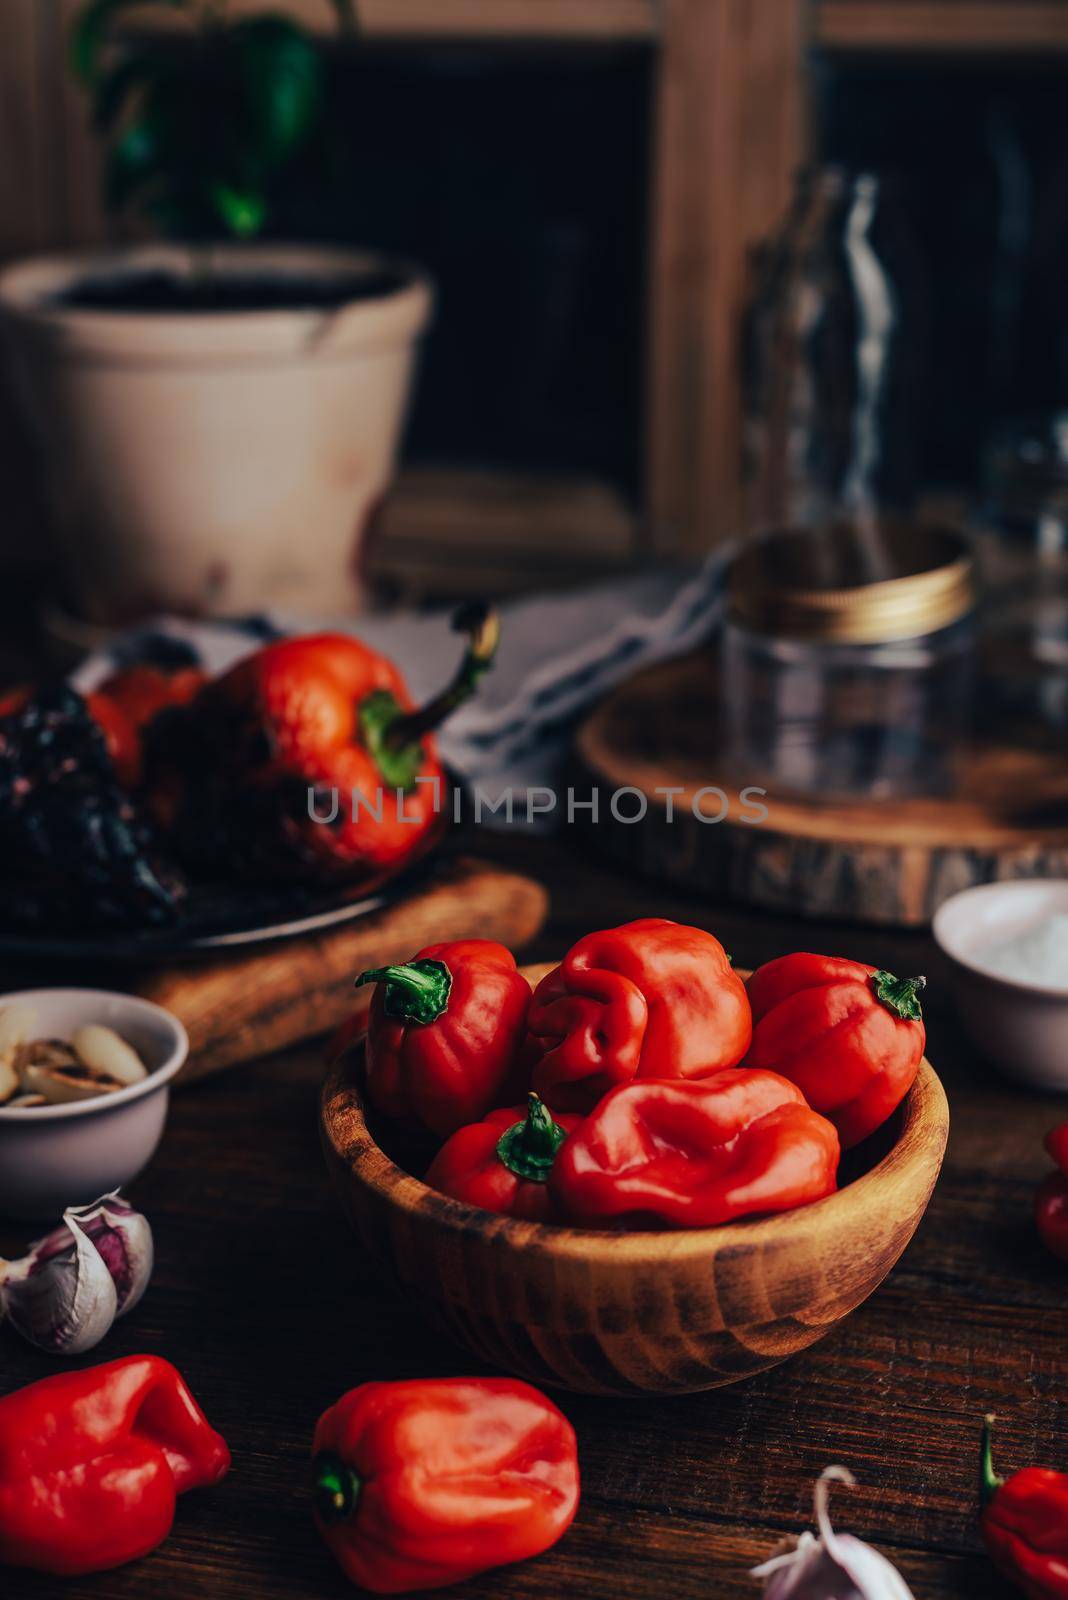 Habanero Peppers and Other Ingredients for Hot Sauce by Seva_blsv